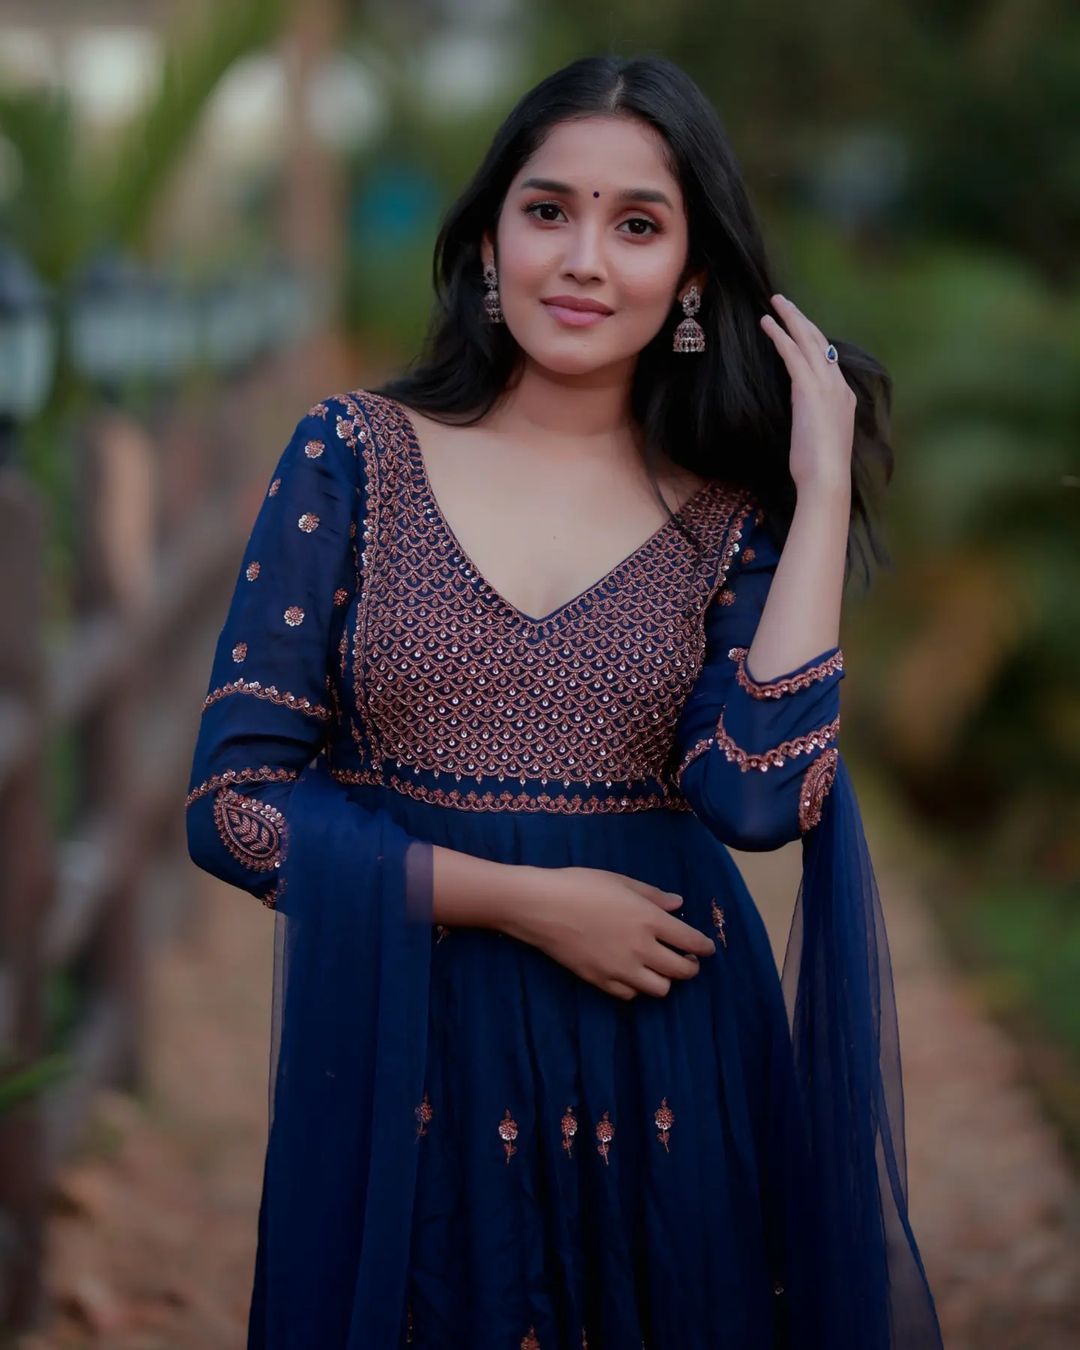 15 Youngest South Indian Actresses That Are Making Waves